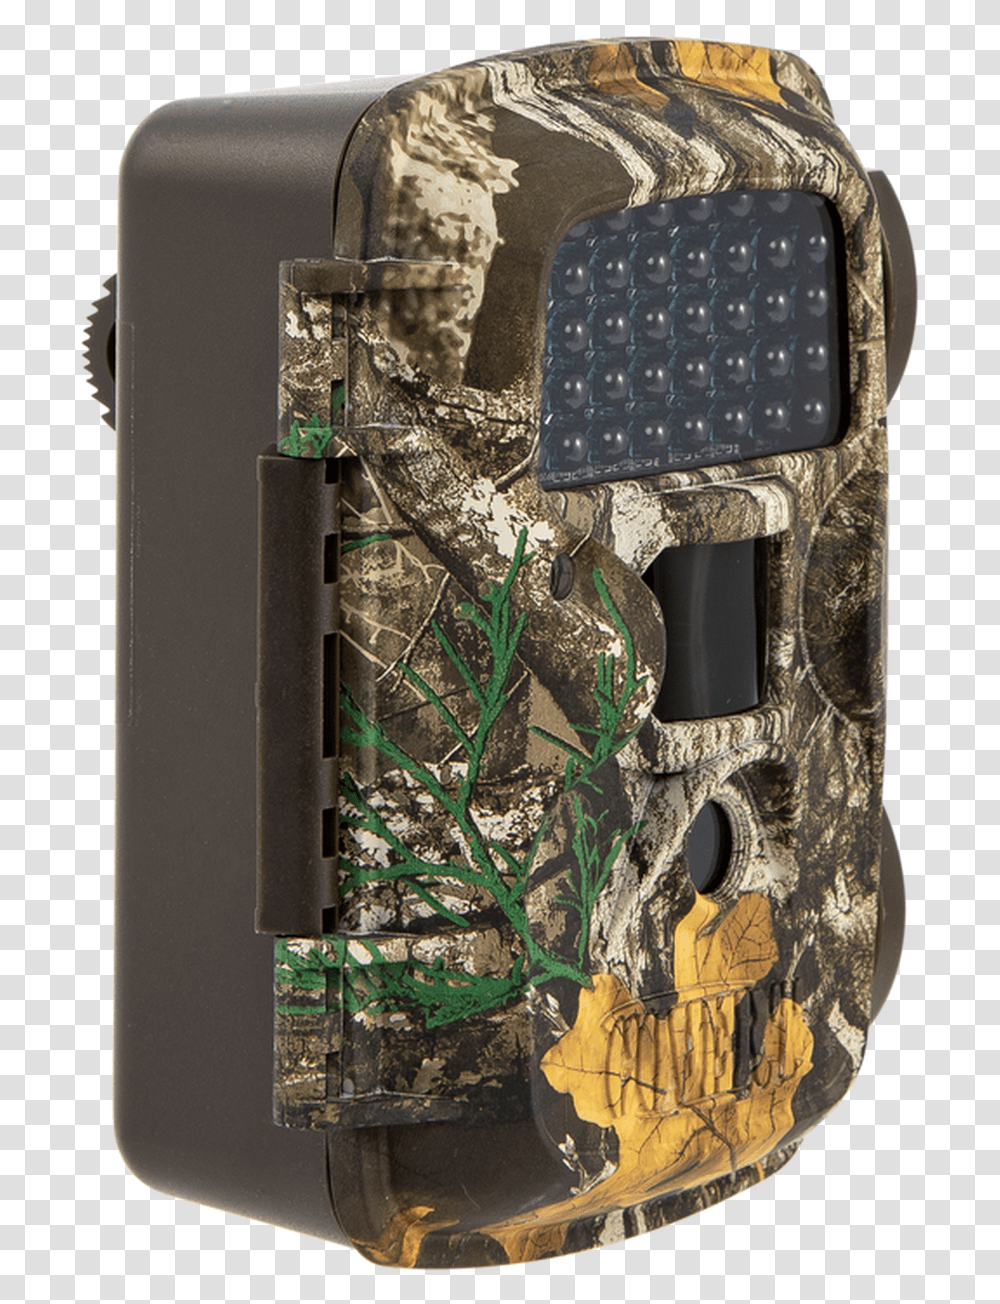 Covert Scouting Cameras Mp16 Trail Camera 16 Mp Realtree Electronics, Furniture, Purse, Handbag, Accessories Transparent Png